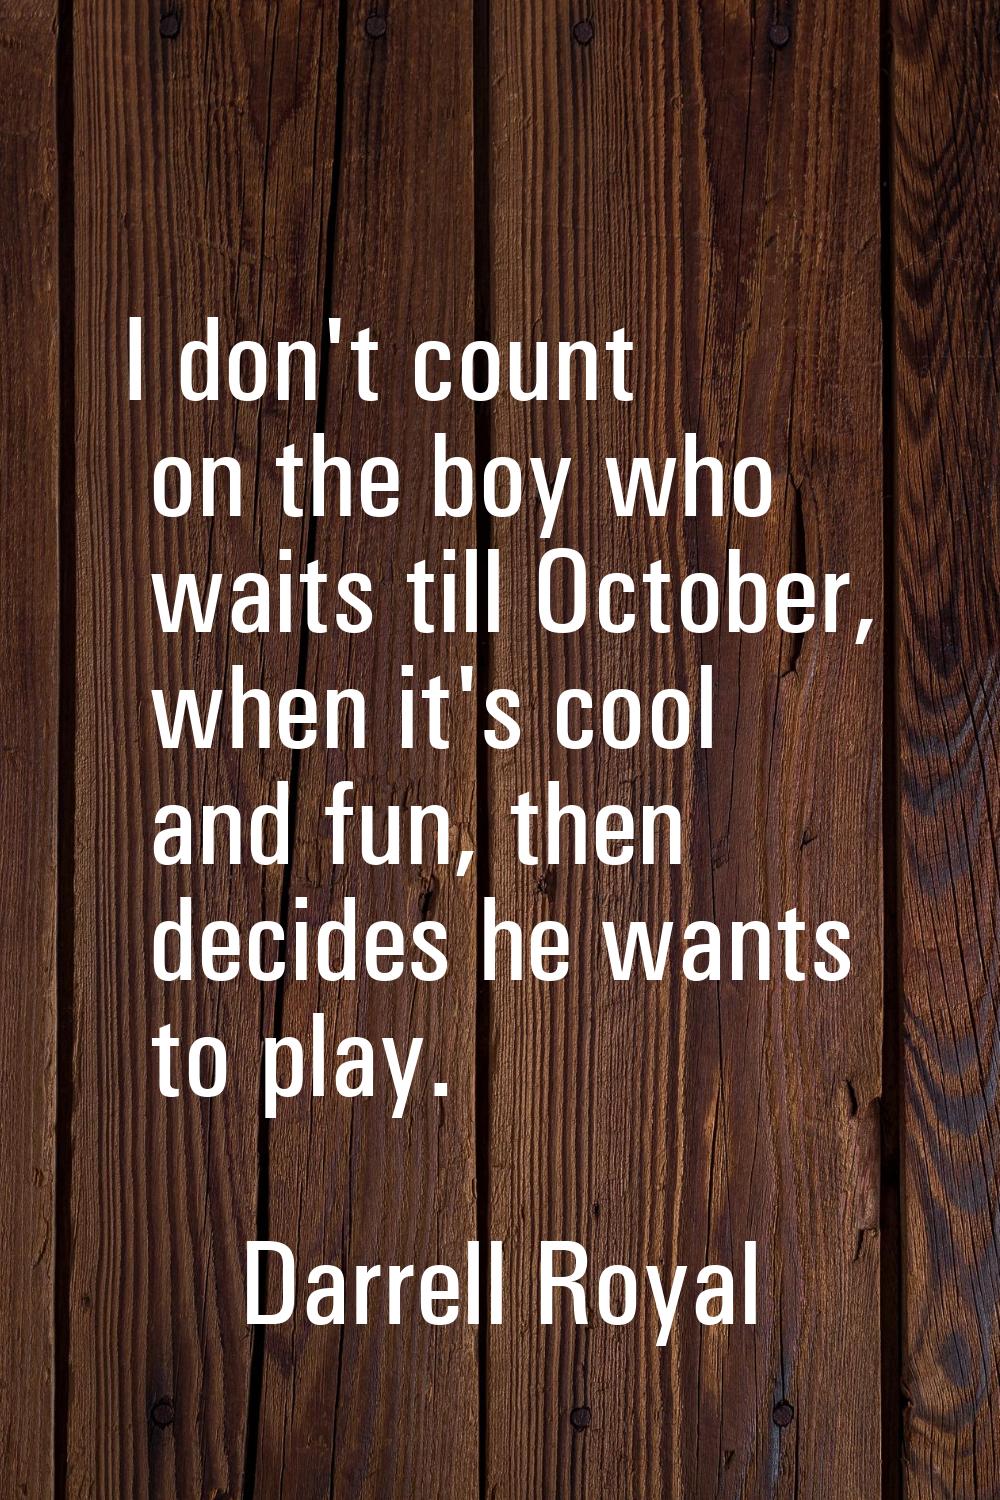 I don't count on the boy who waits till October, when it's cool and fun, then decides he wants to p